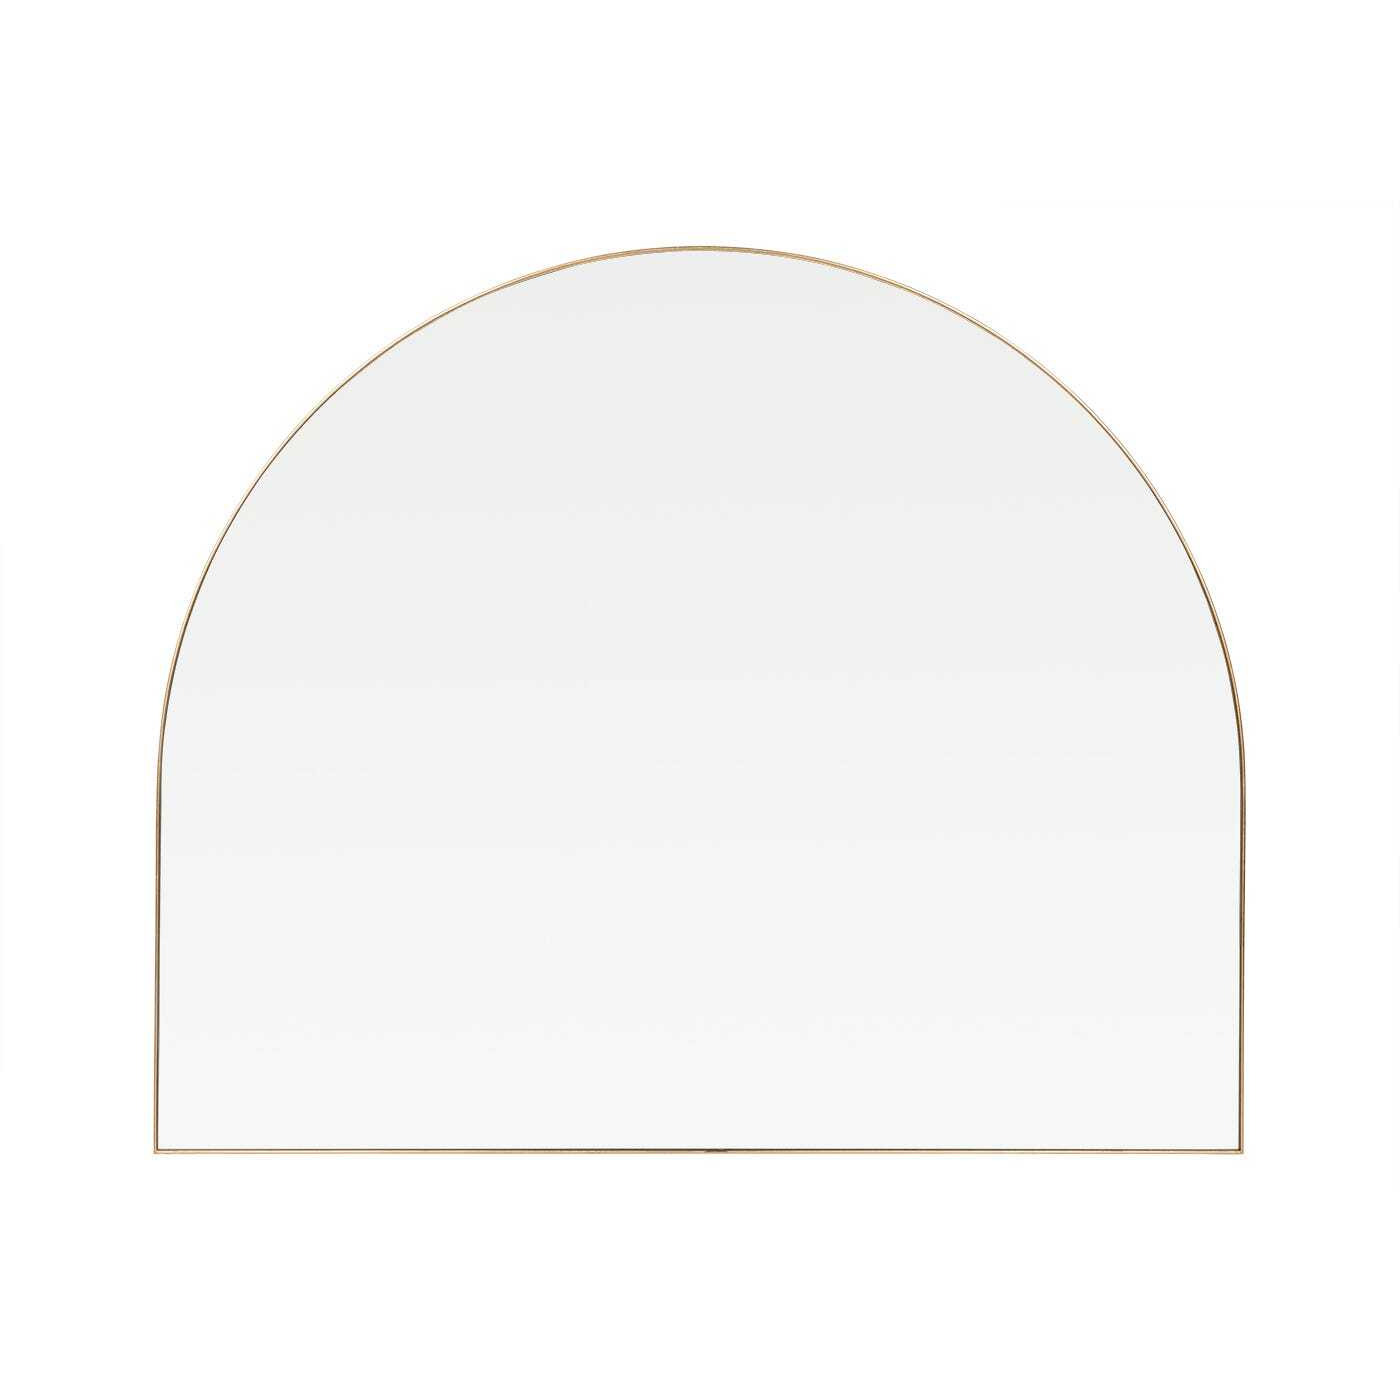 Heal's Fine Edge Mirror Over Mantle Gold Large - image 1